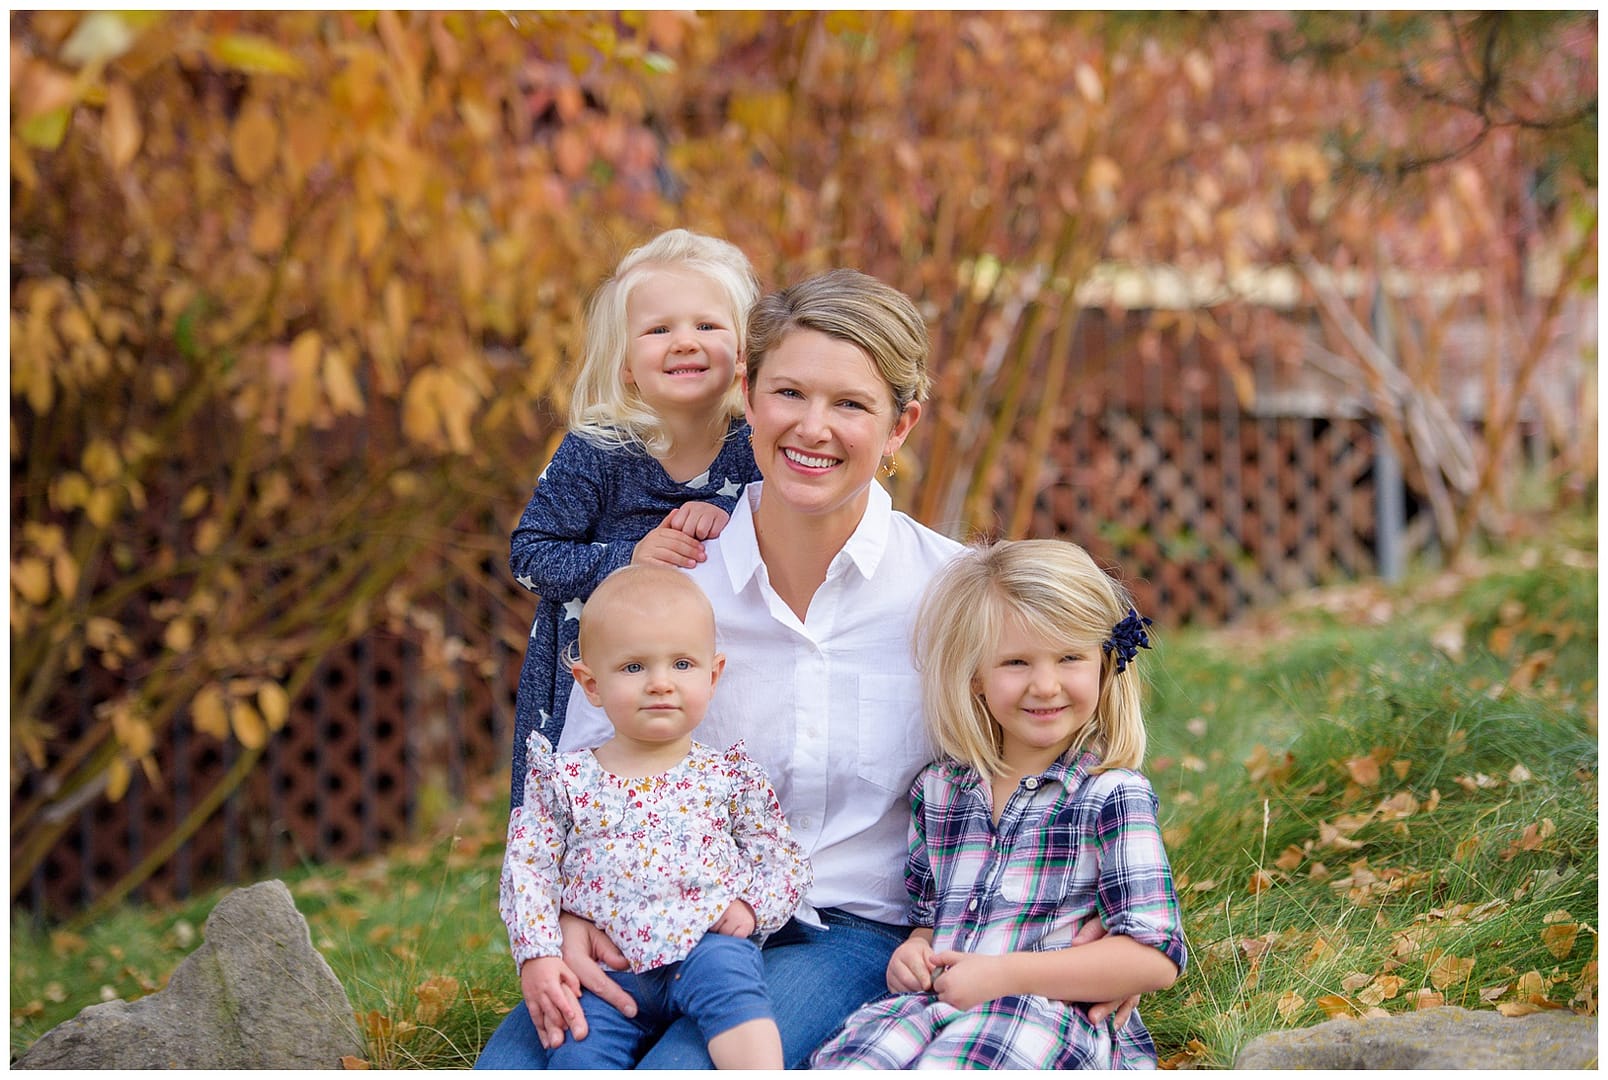 Mom takes photography with three daughters. Photo by Tiffany Hix Photography